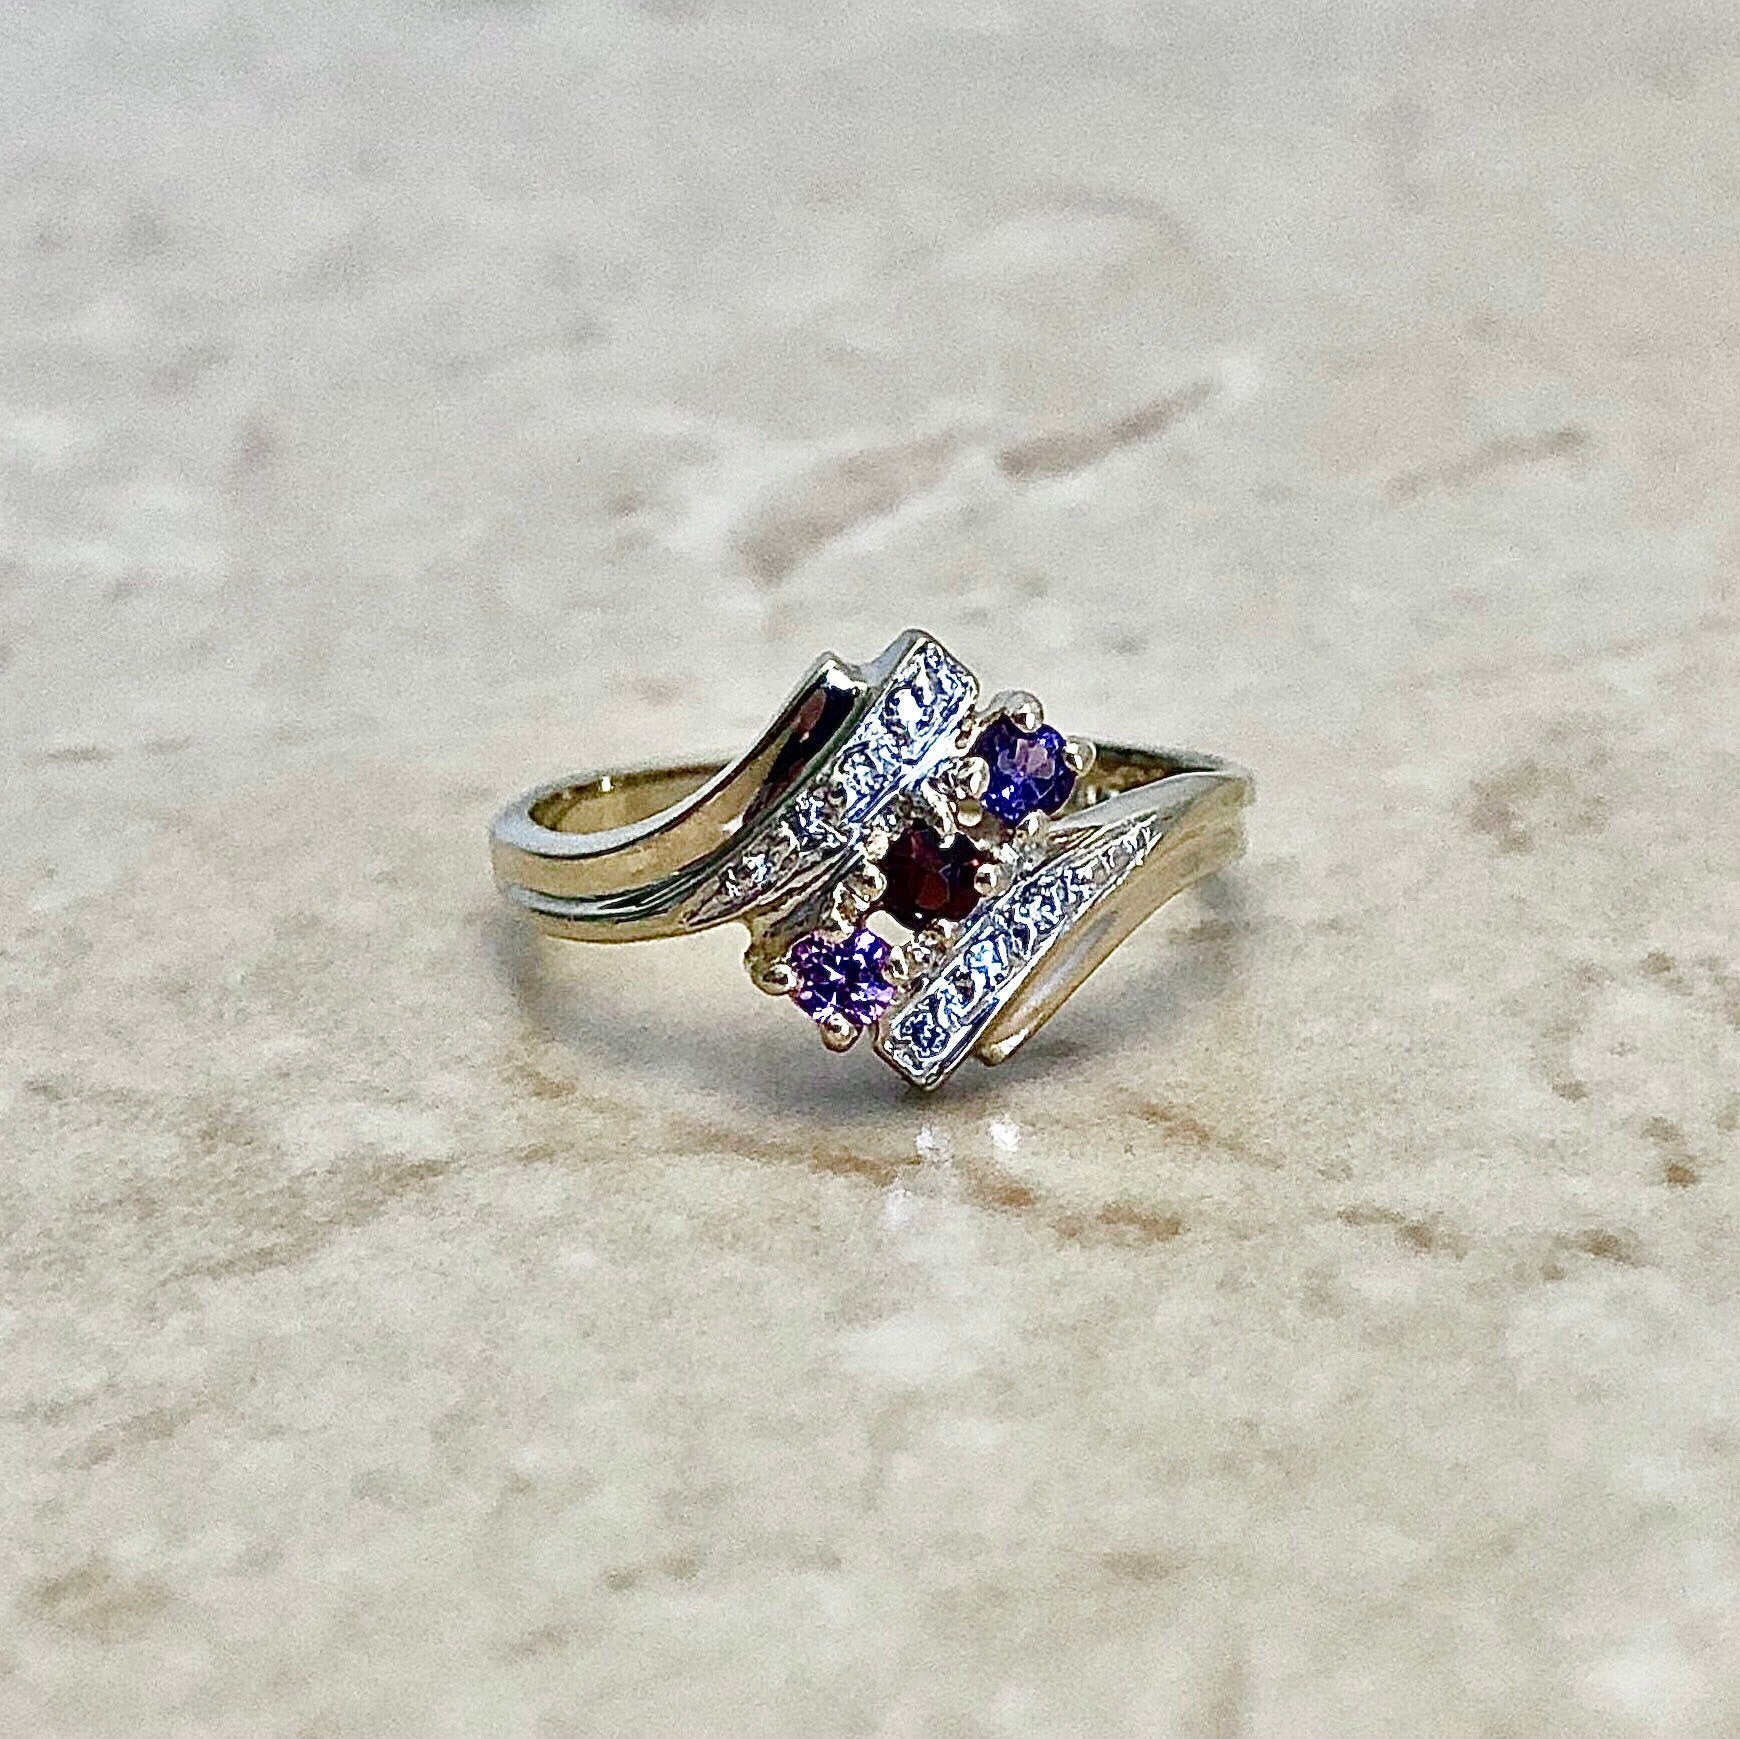 10K Amethyst, Garnet, Tourmaline & Diamond Mother’s Ring - Two Tone Gold Cocktail Ring - January February October Birthstone Gift